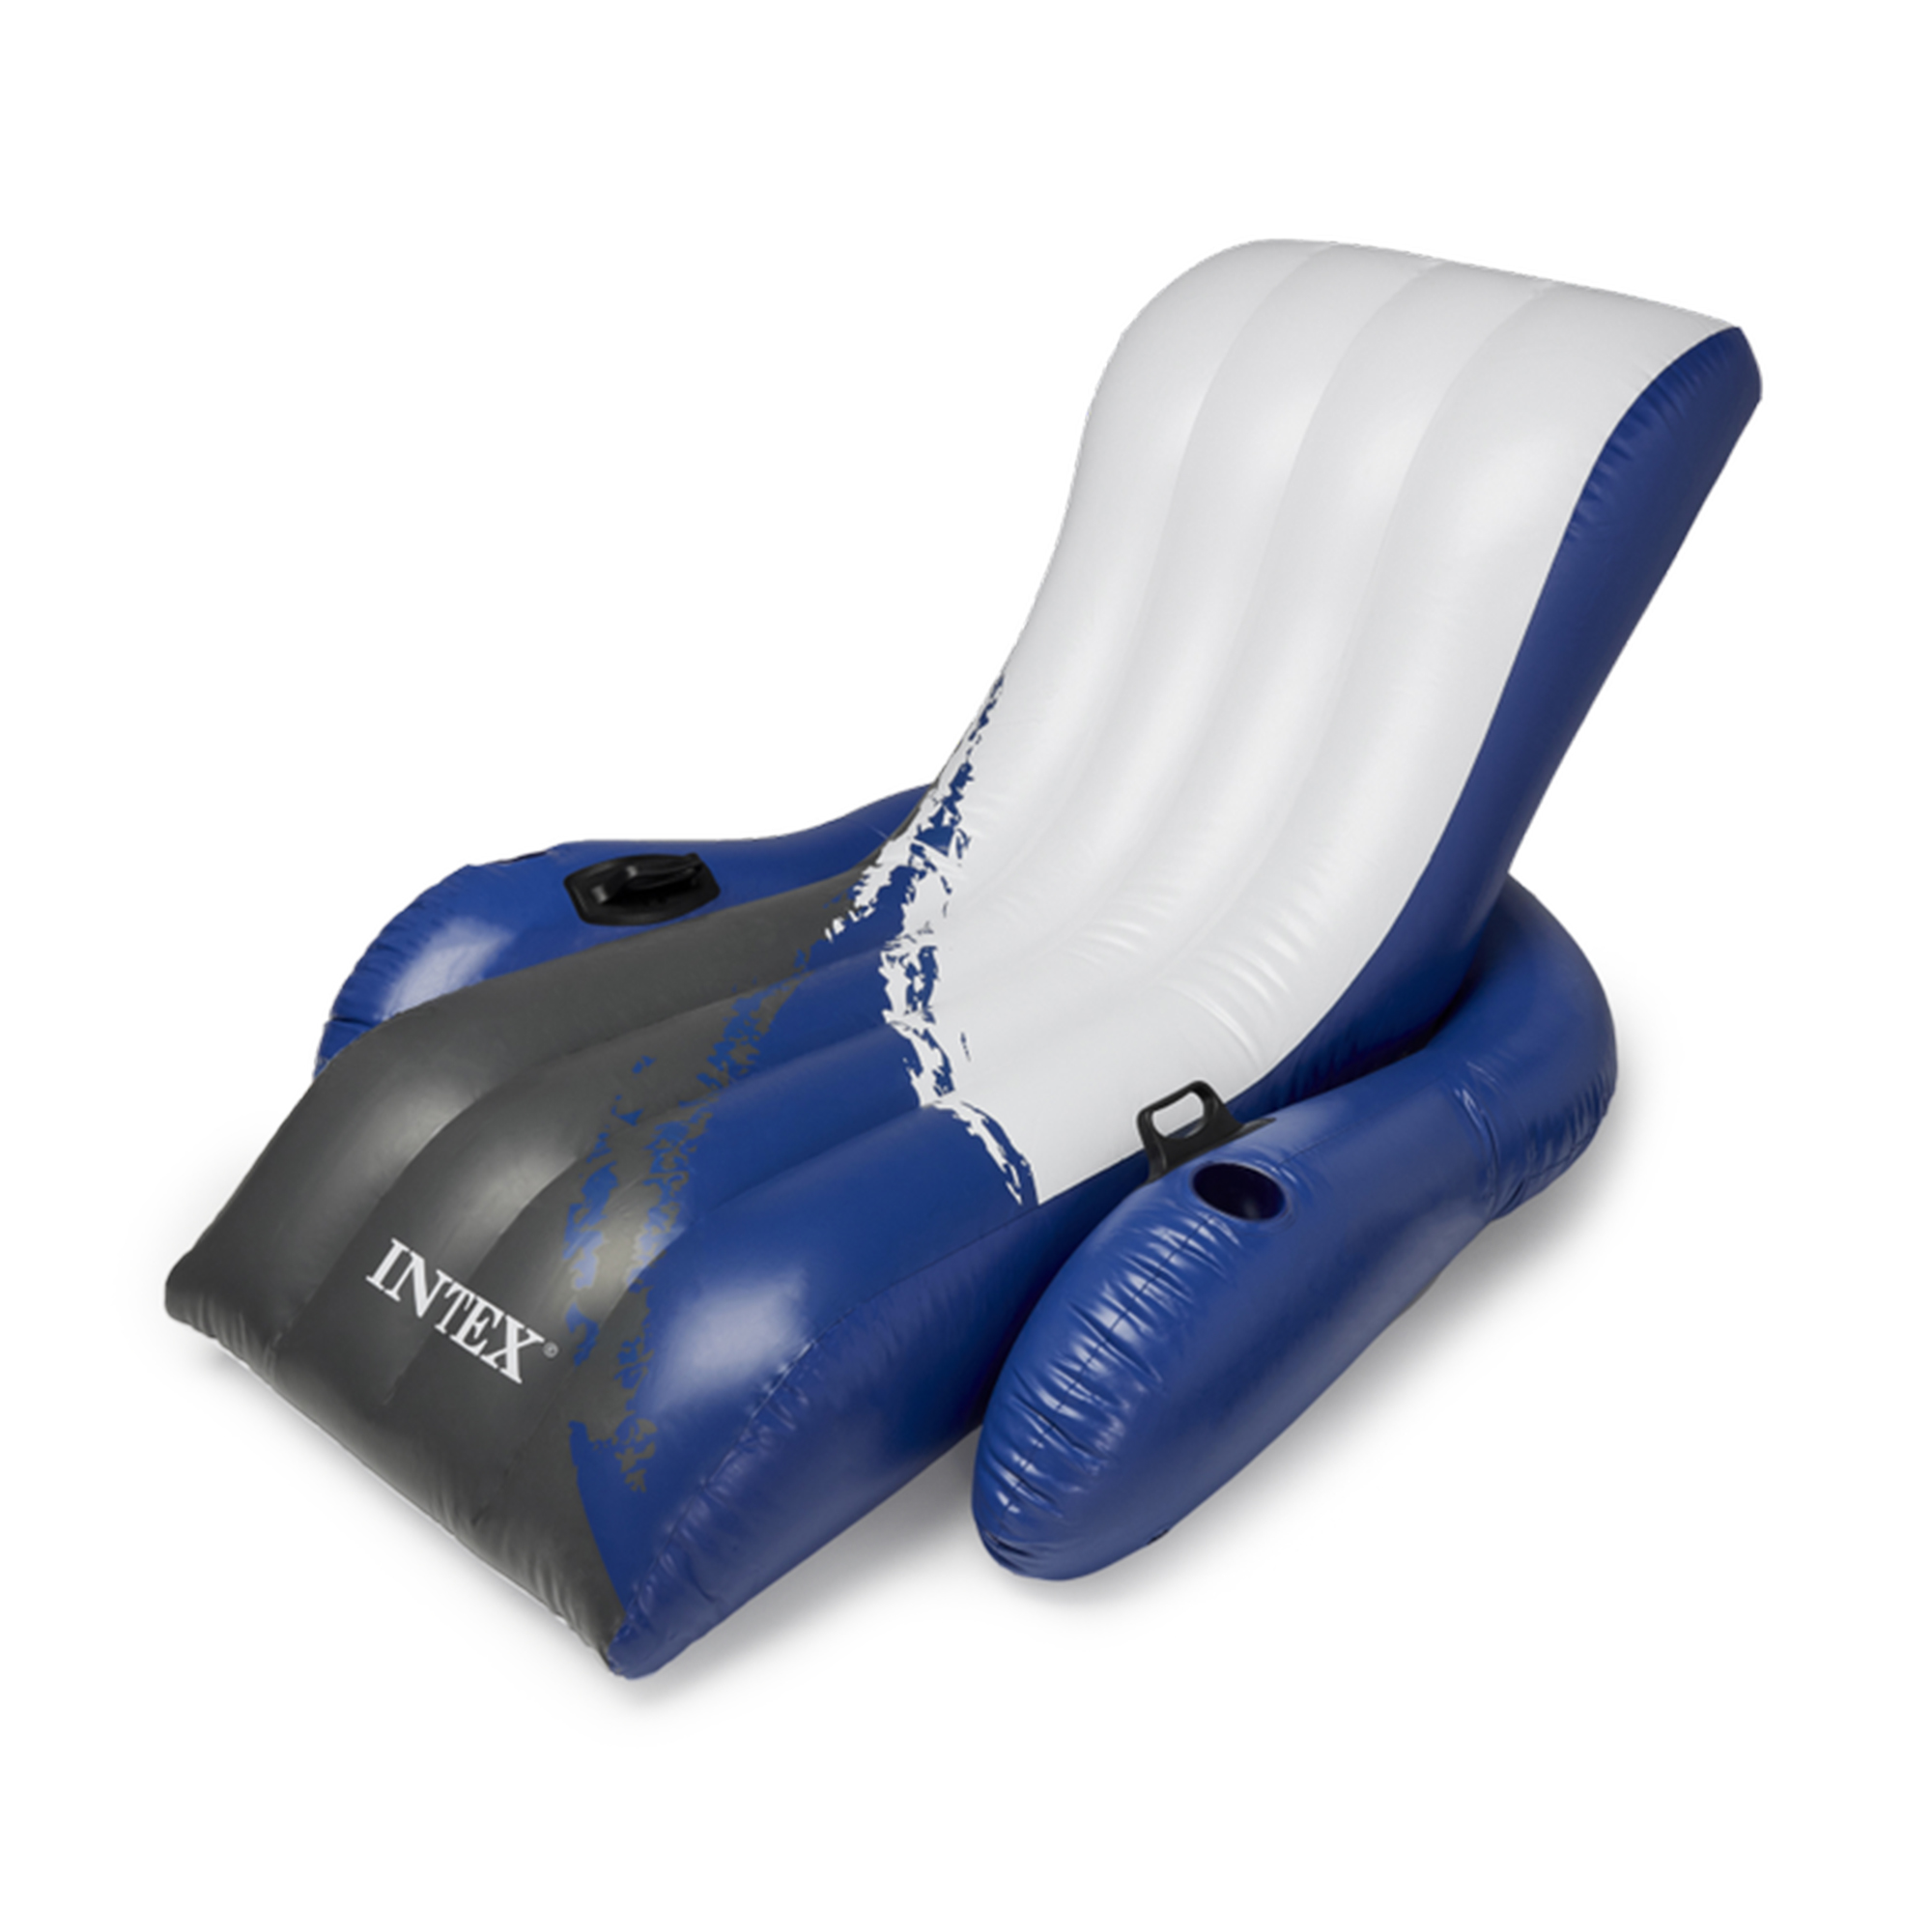 Inflatable Floating Lounge Pool Recliner Chair W/ Cup Holders, Blue/Black/White, Adult - image 1 of 9